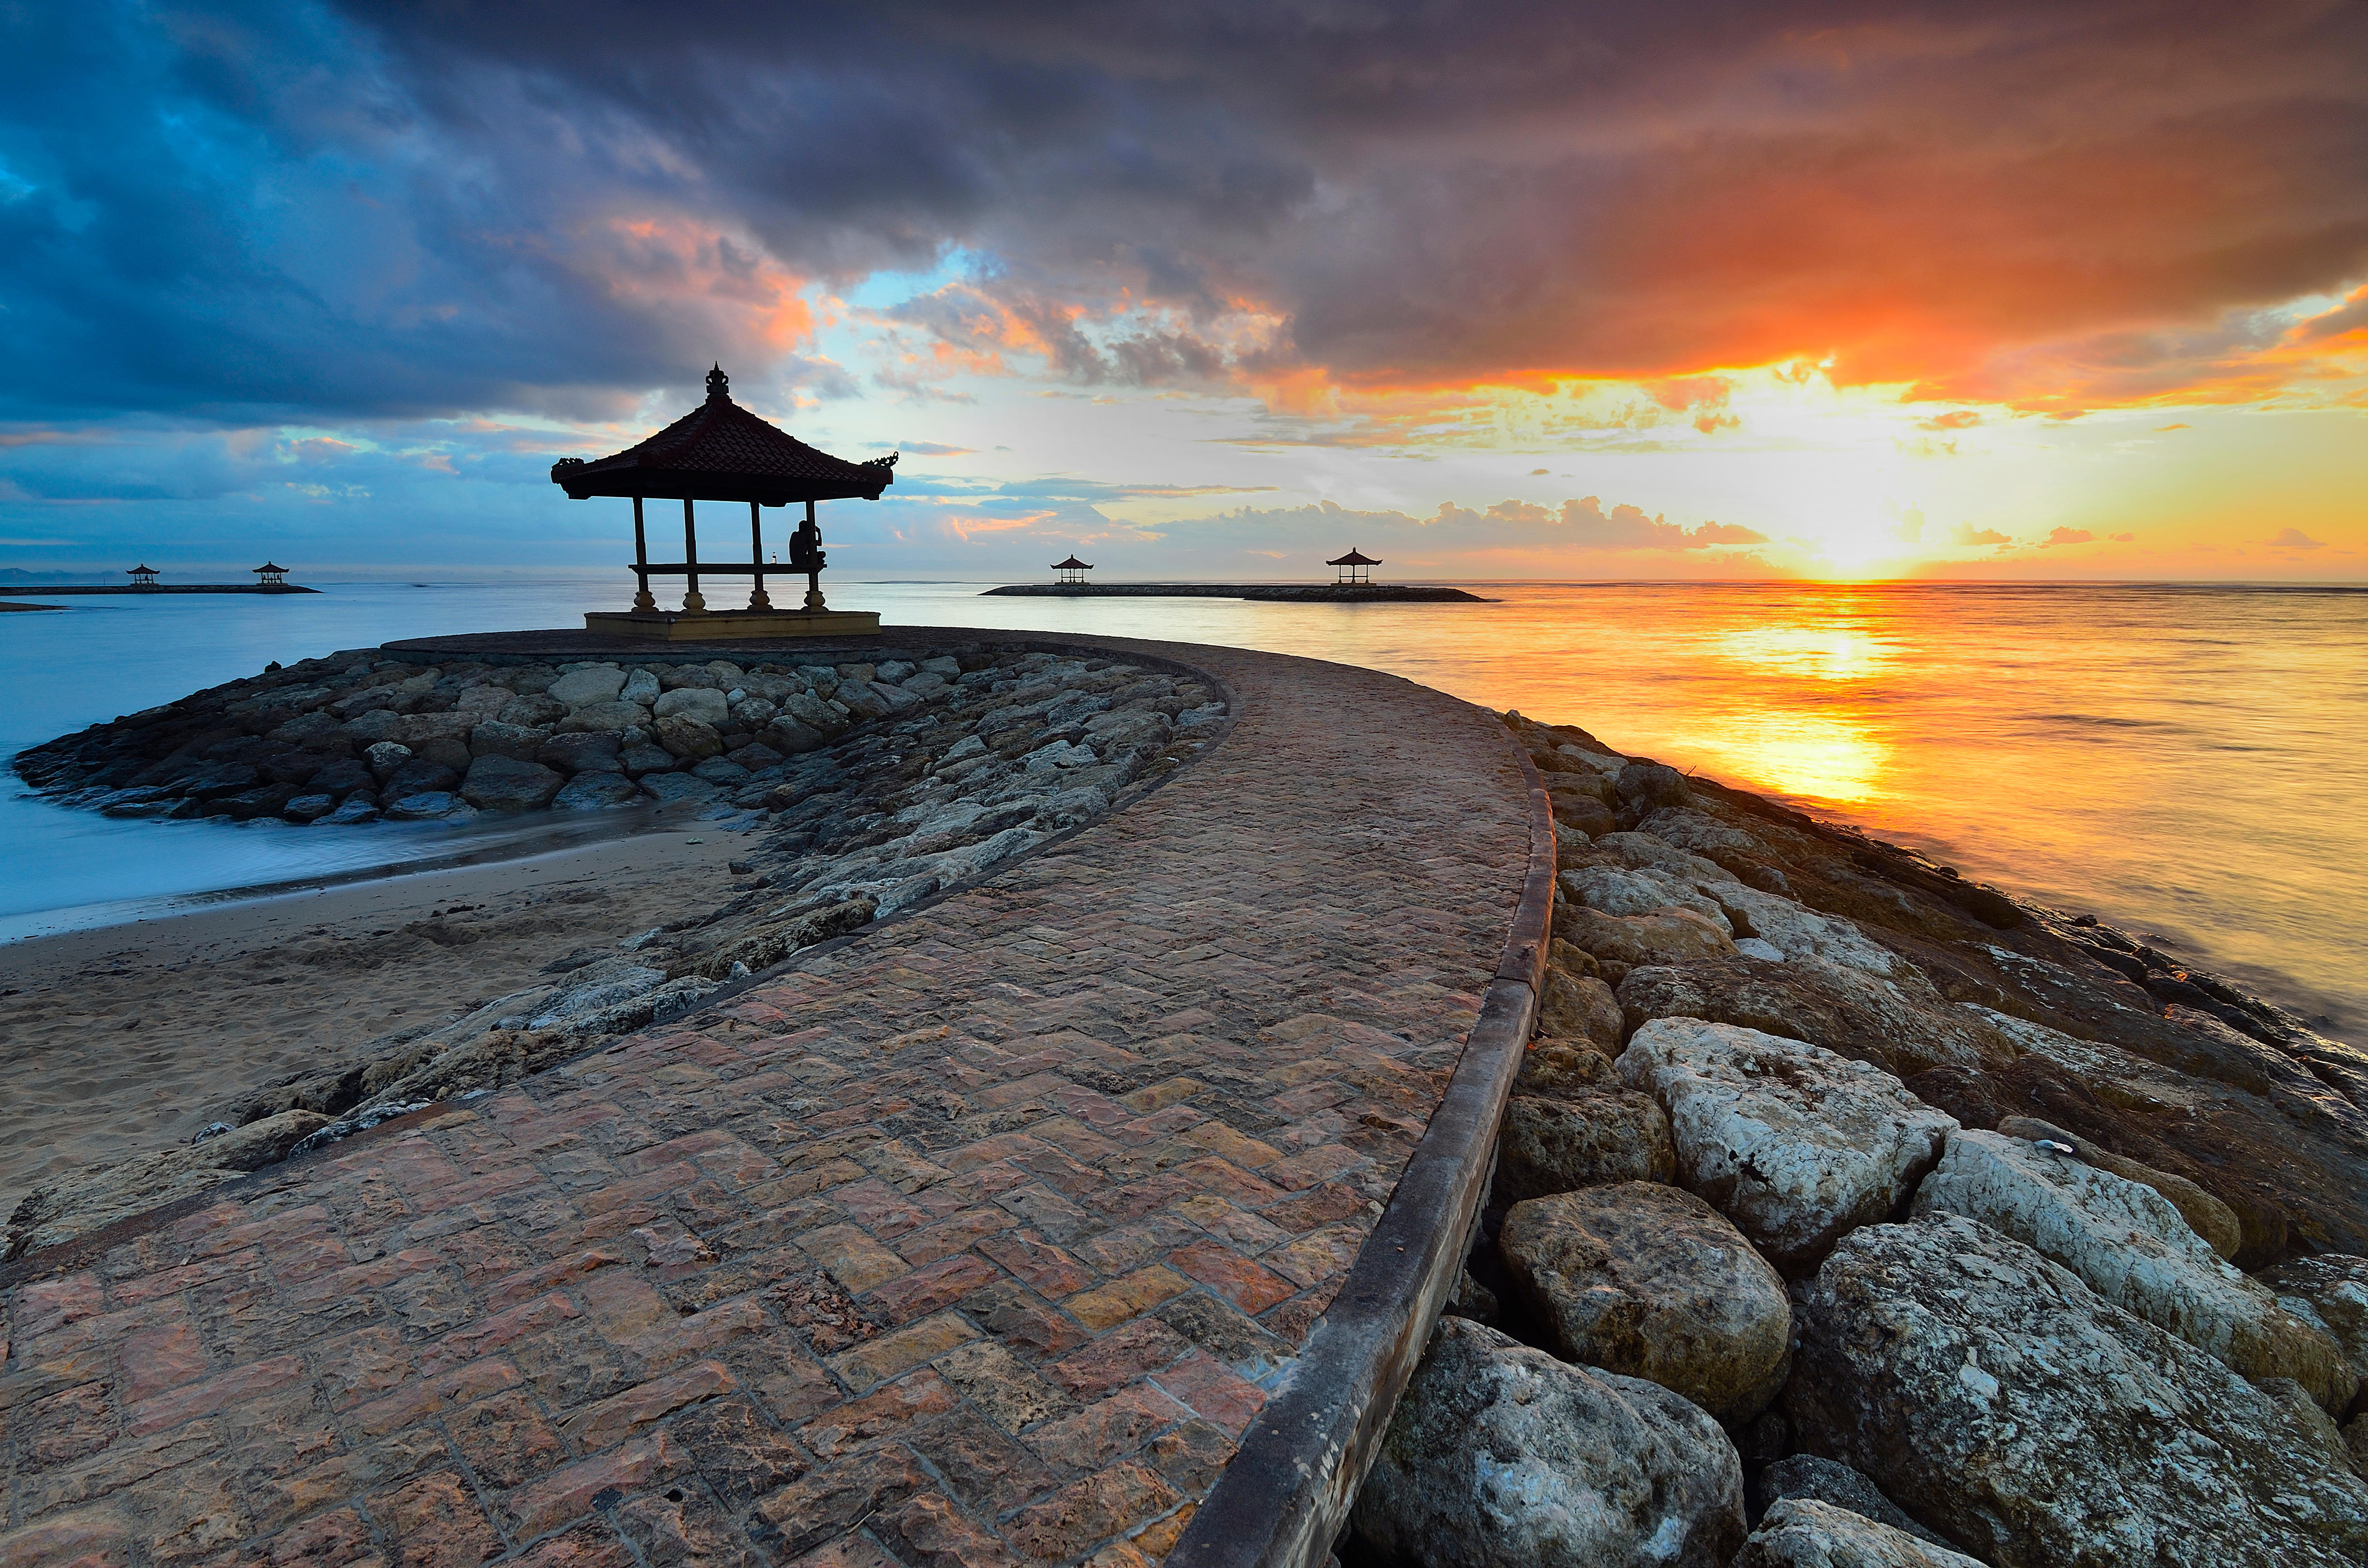  Sanur  One of the Top Attractions in Bali Indonesia  